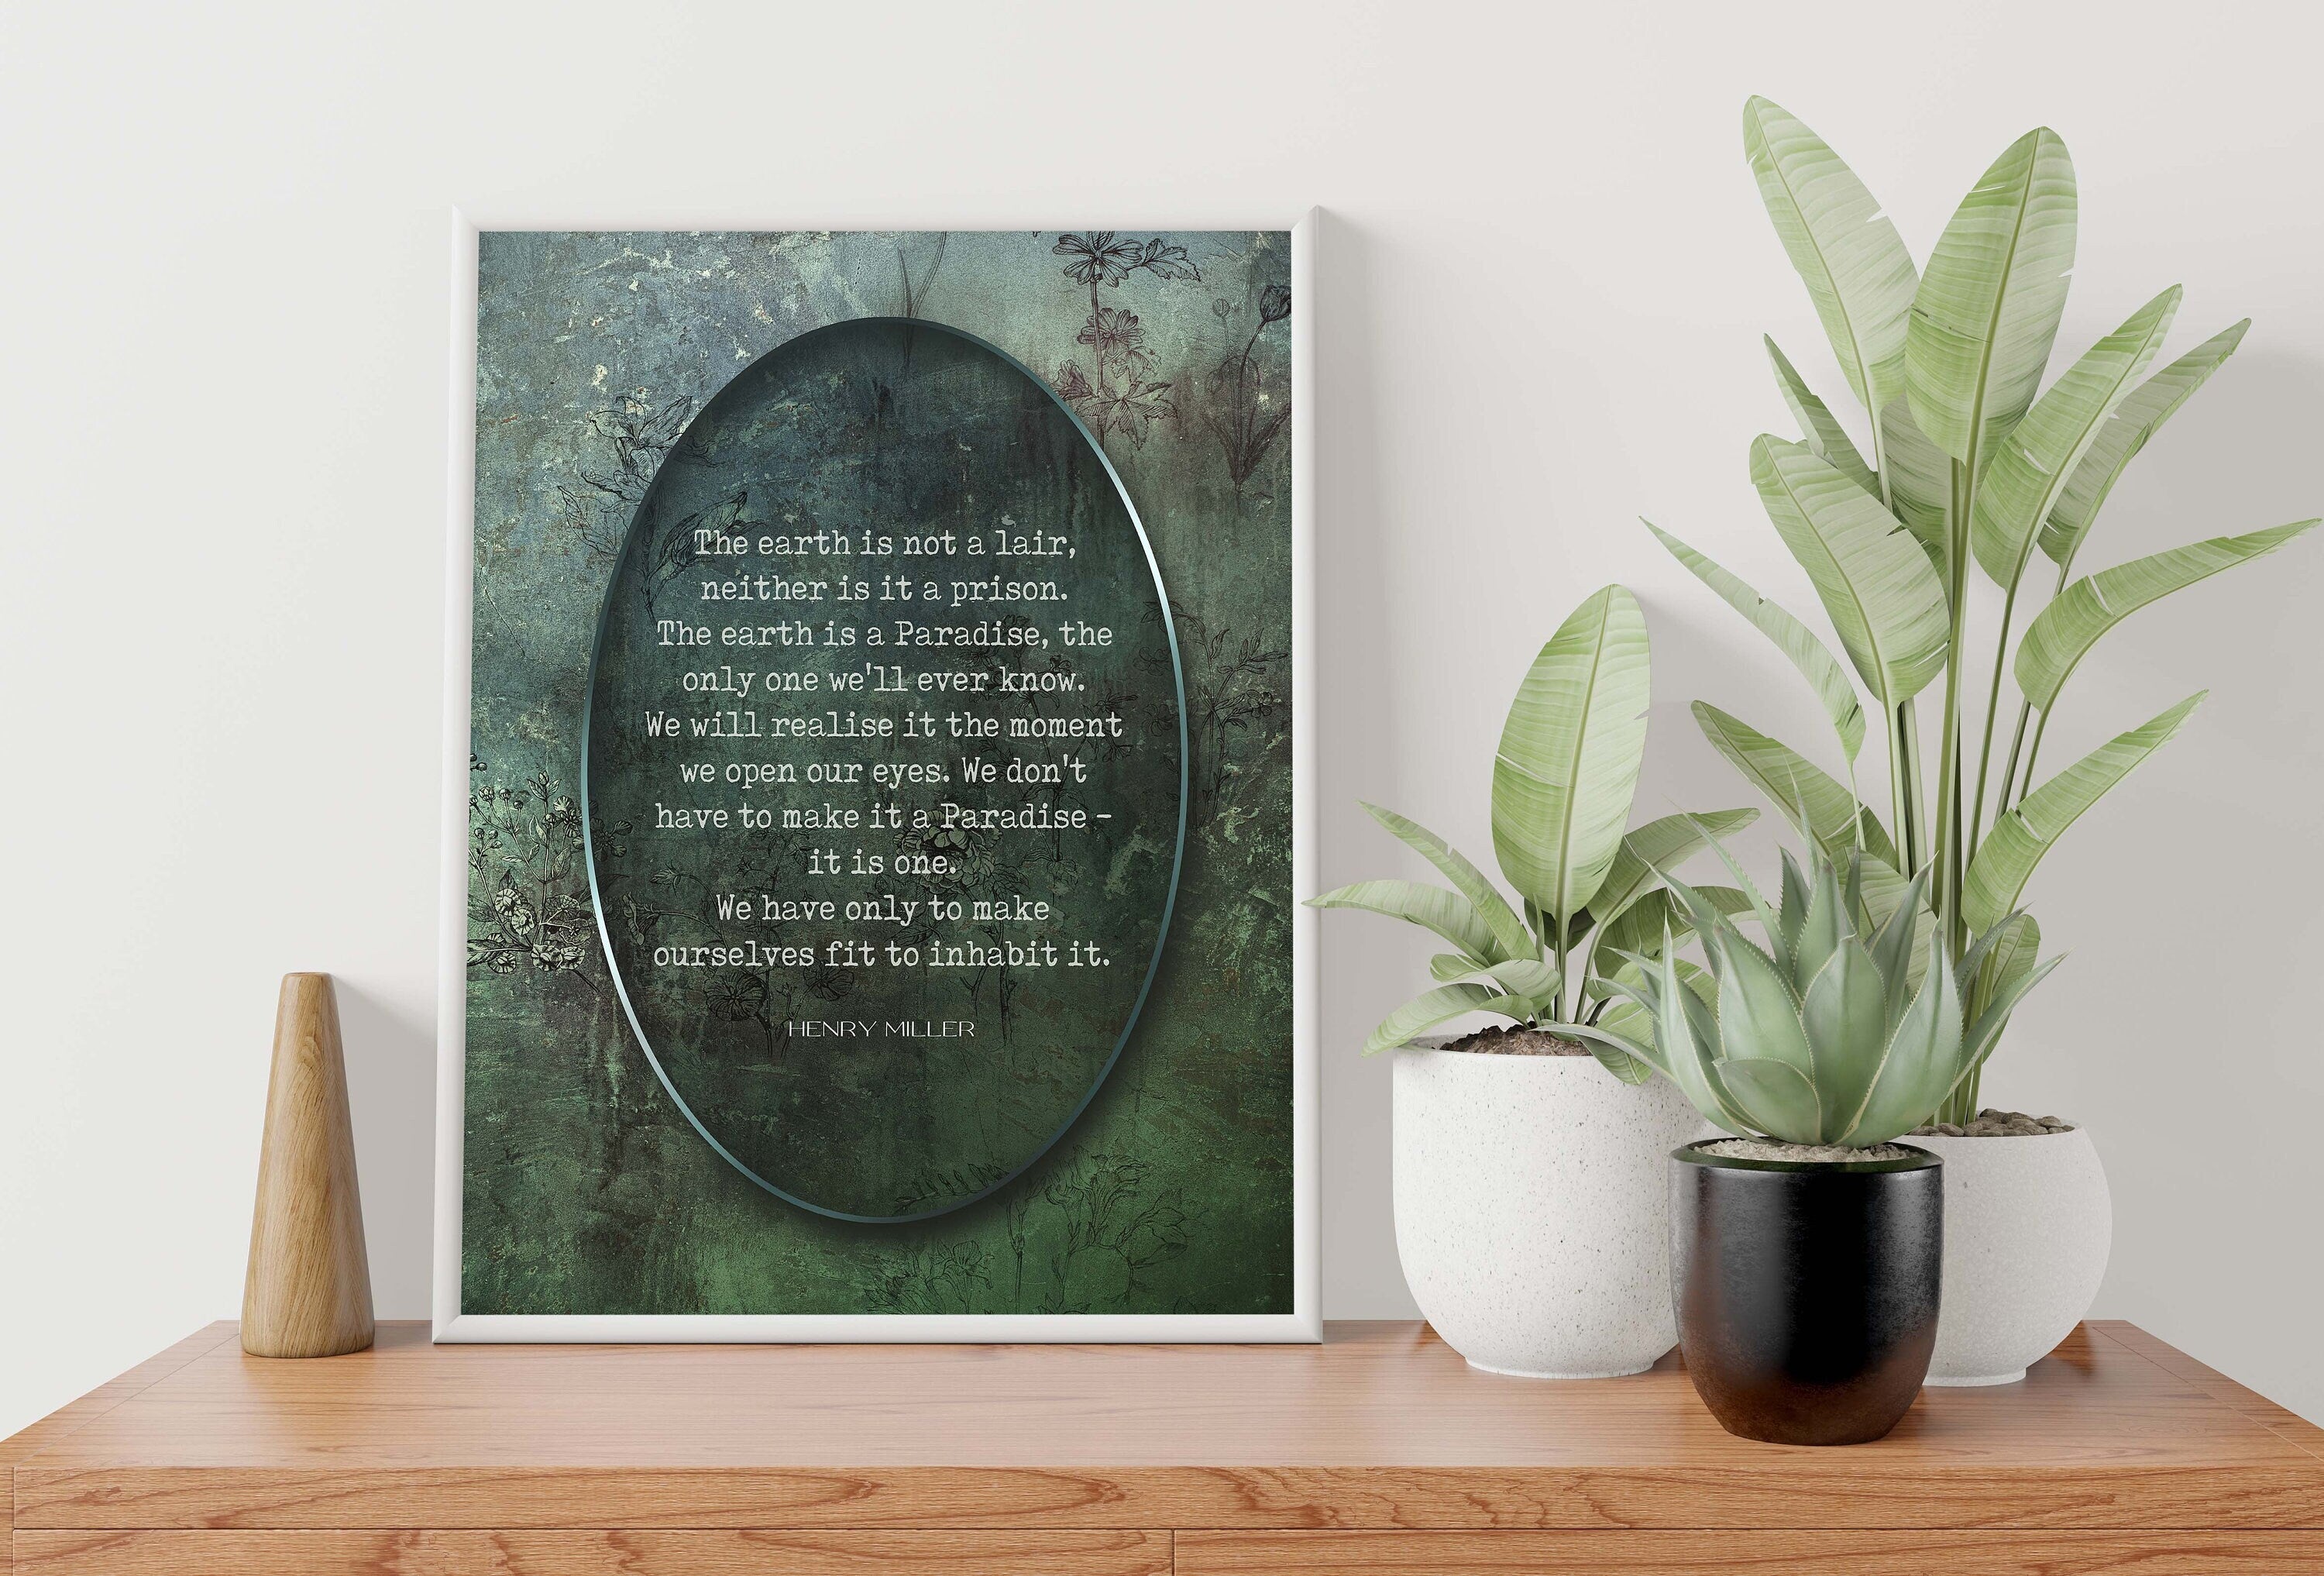 The earth is a Paradise Henry Miller Quote Wall Art Print, Unframed Inspirational Botanical Nature Wall Decor in Green